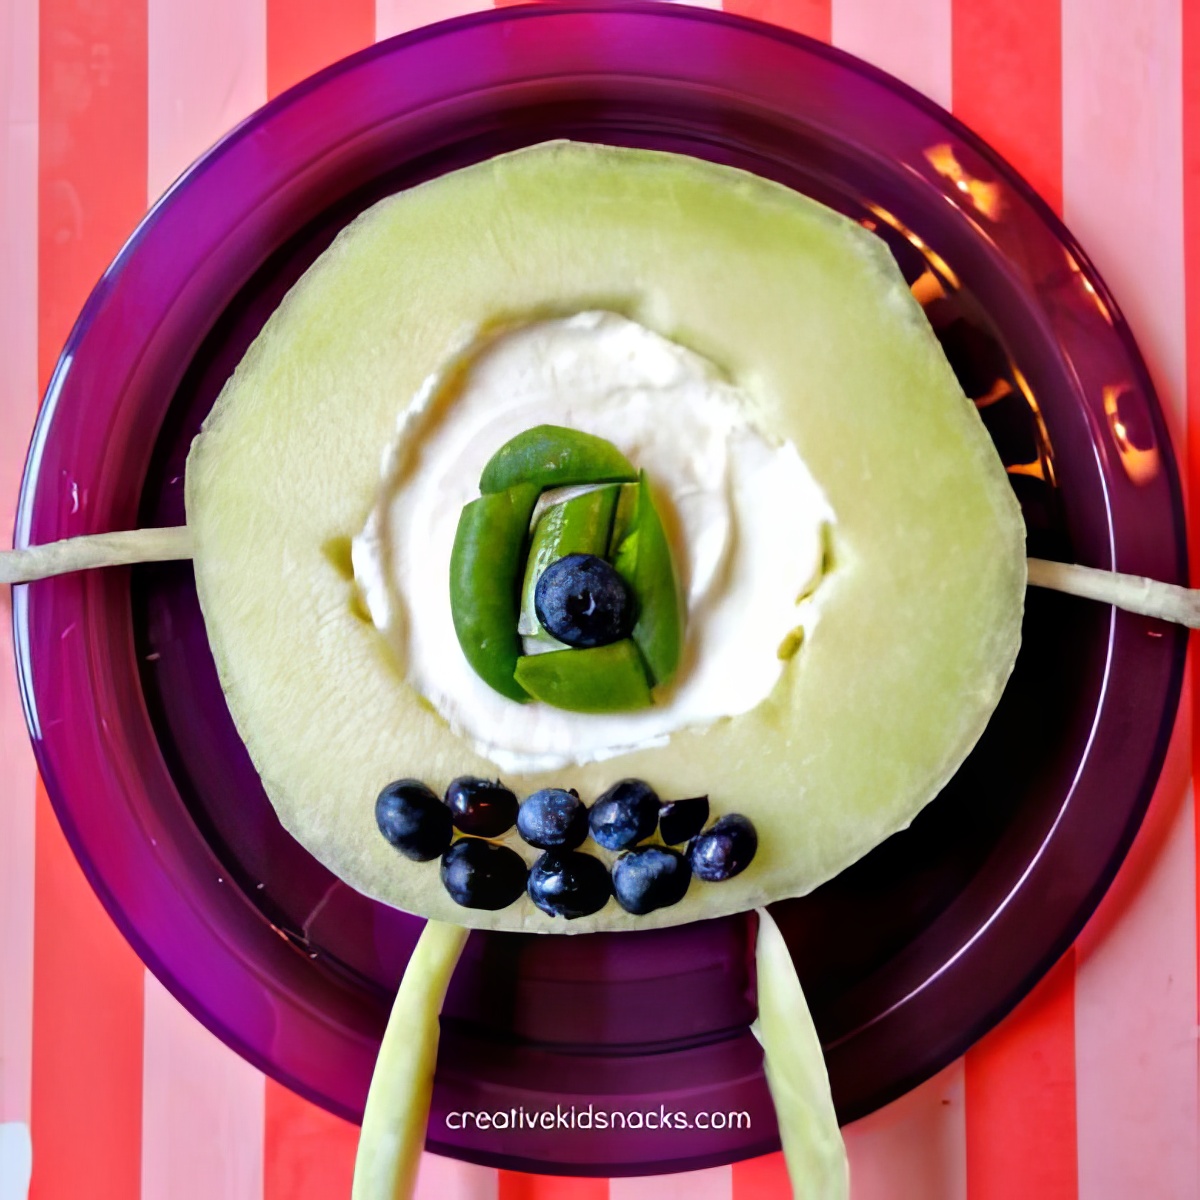 Try this Mike Wazowski yummy recipe with your kids while watching again the Monster Inc. movie!